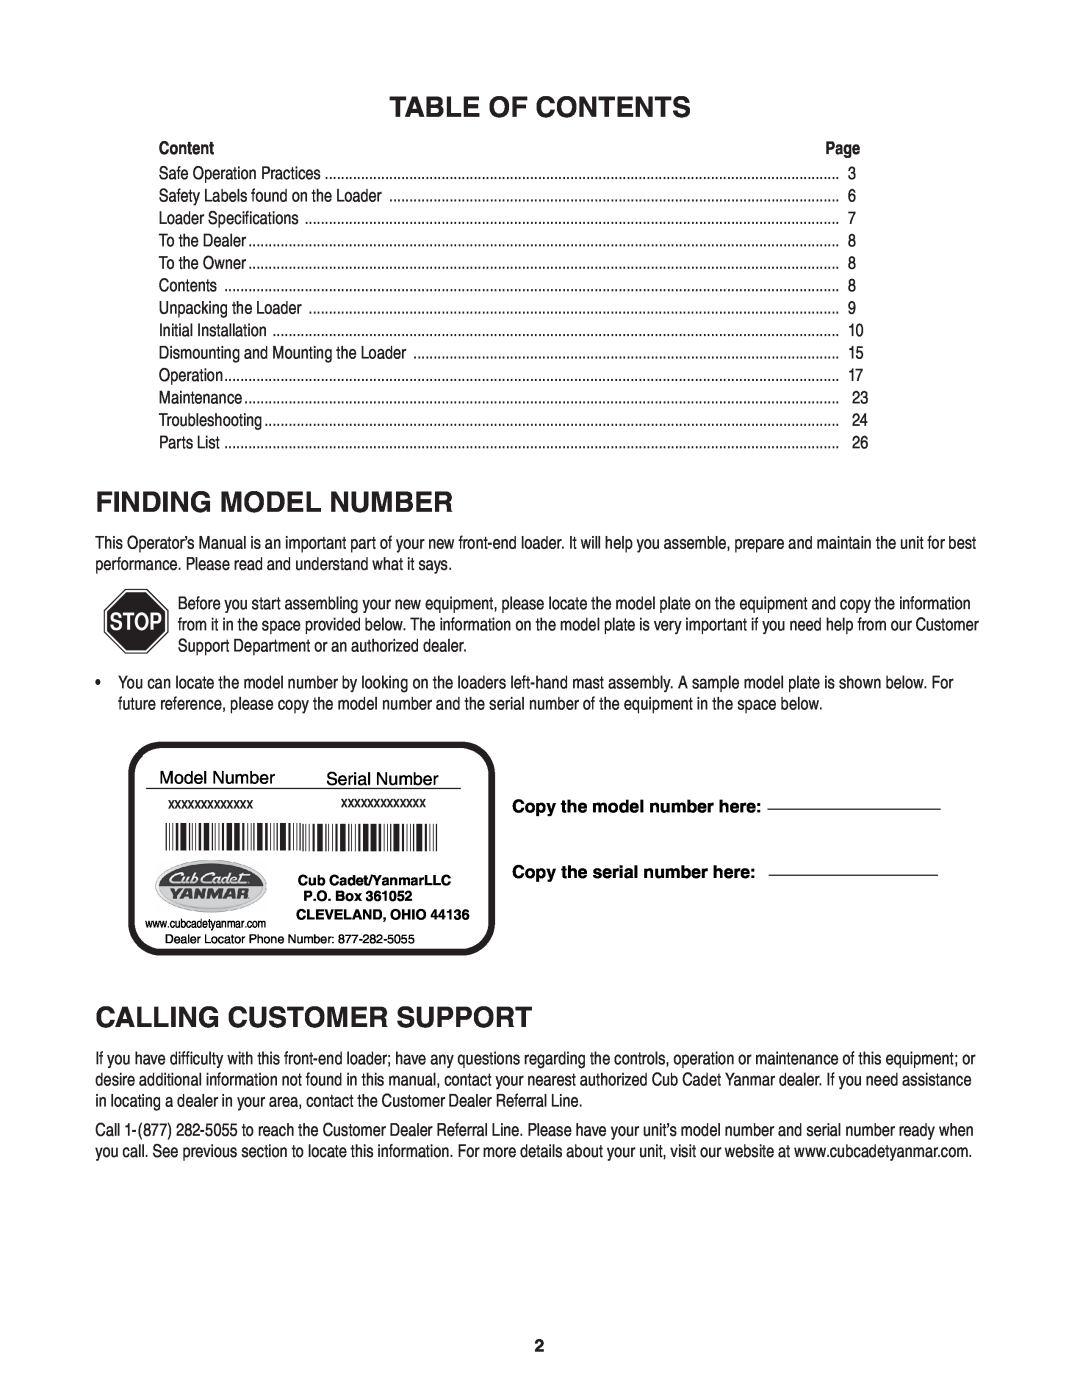 Cub Cadet 59A40003727 manual Table of Contents, Finding Model Number, Calling Customer Support 